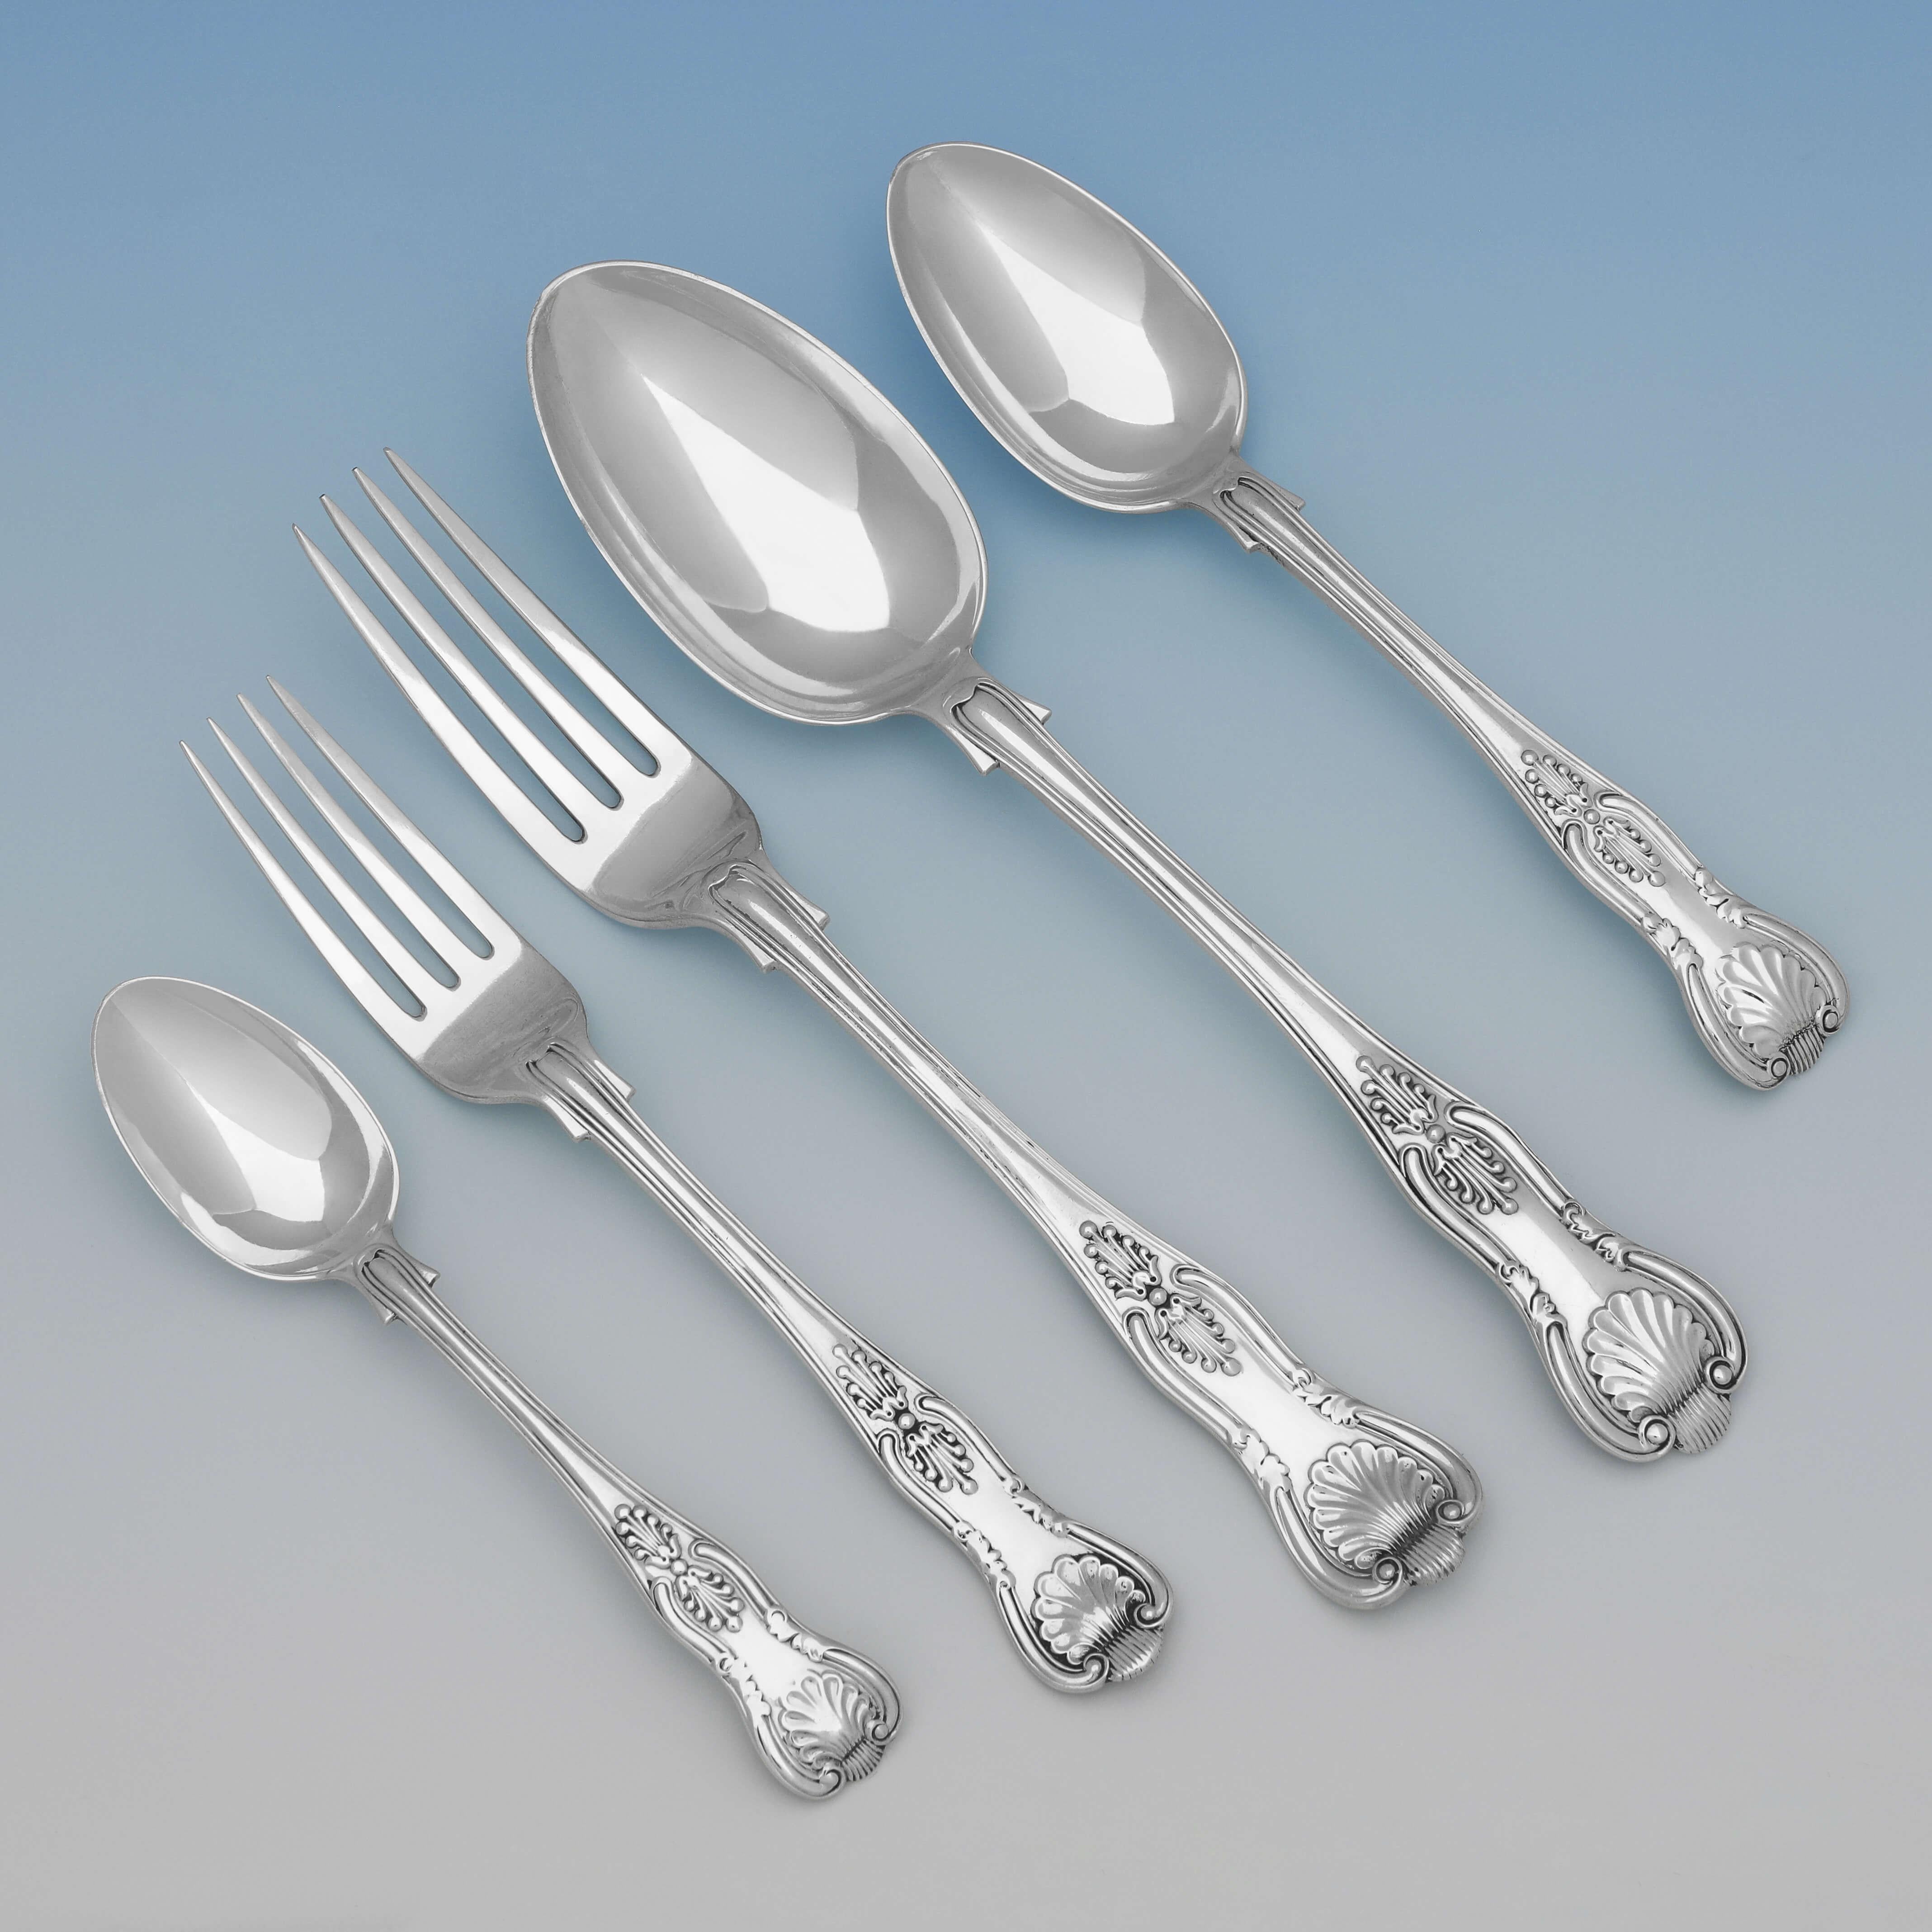 A Single Maker, Mixed Years set of Antique, Sterling Silver Kings Pattern Flatware, hallmarked in London between 1900 and 1907 by Jackson & Fullerton.

Sold with modern Kings pattern sterling silver knives as pictured. 
Each place setting